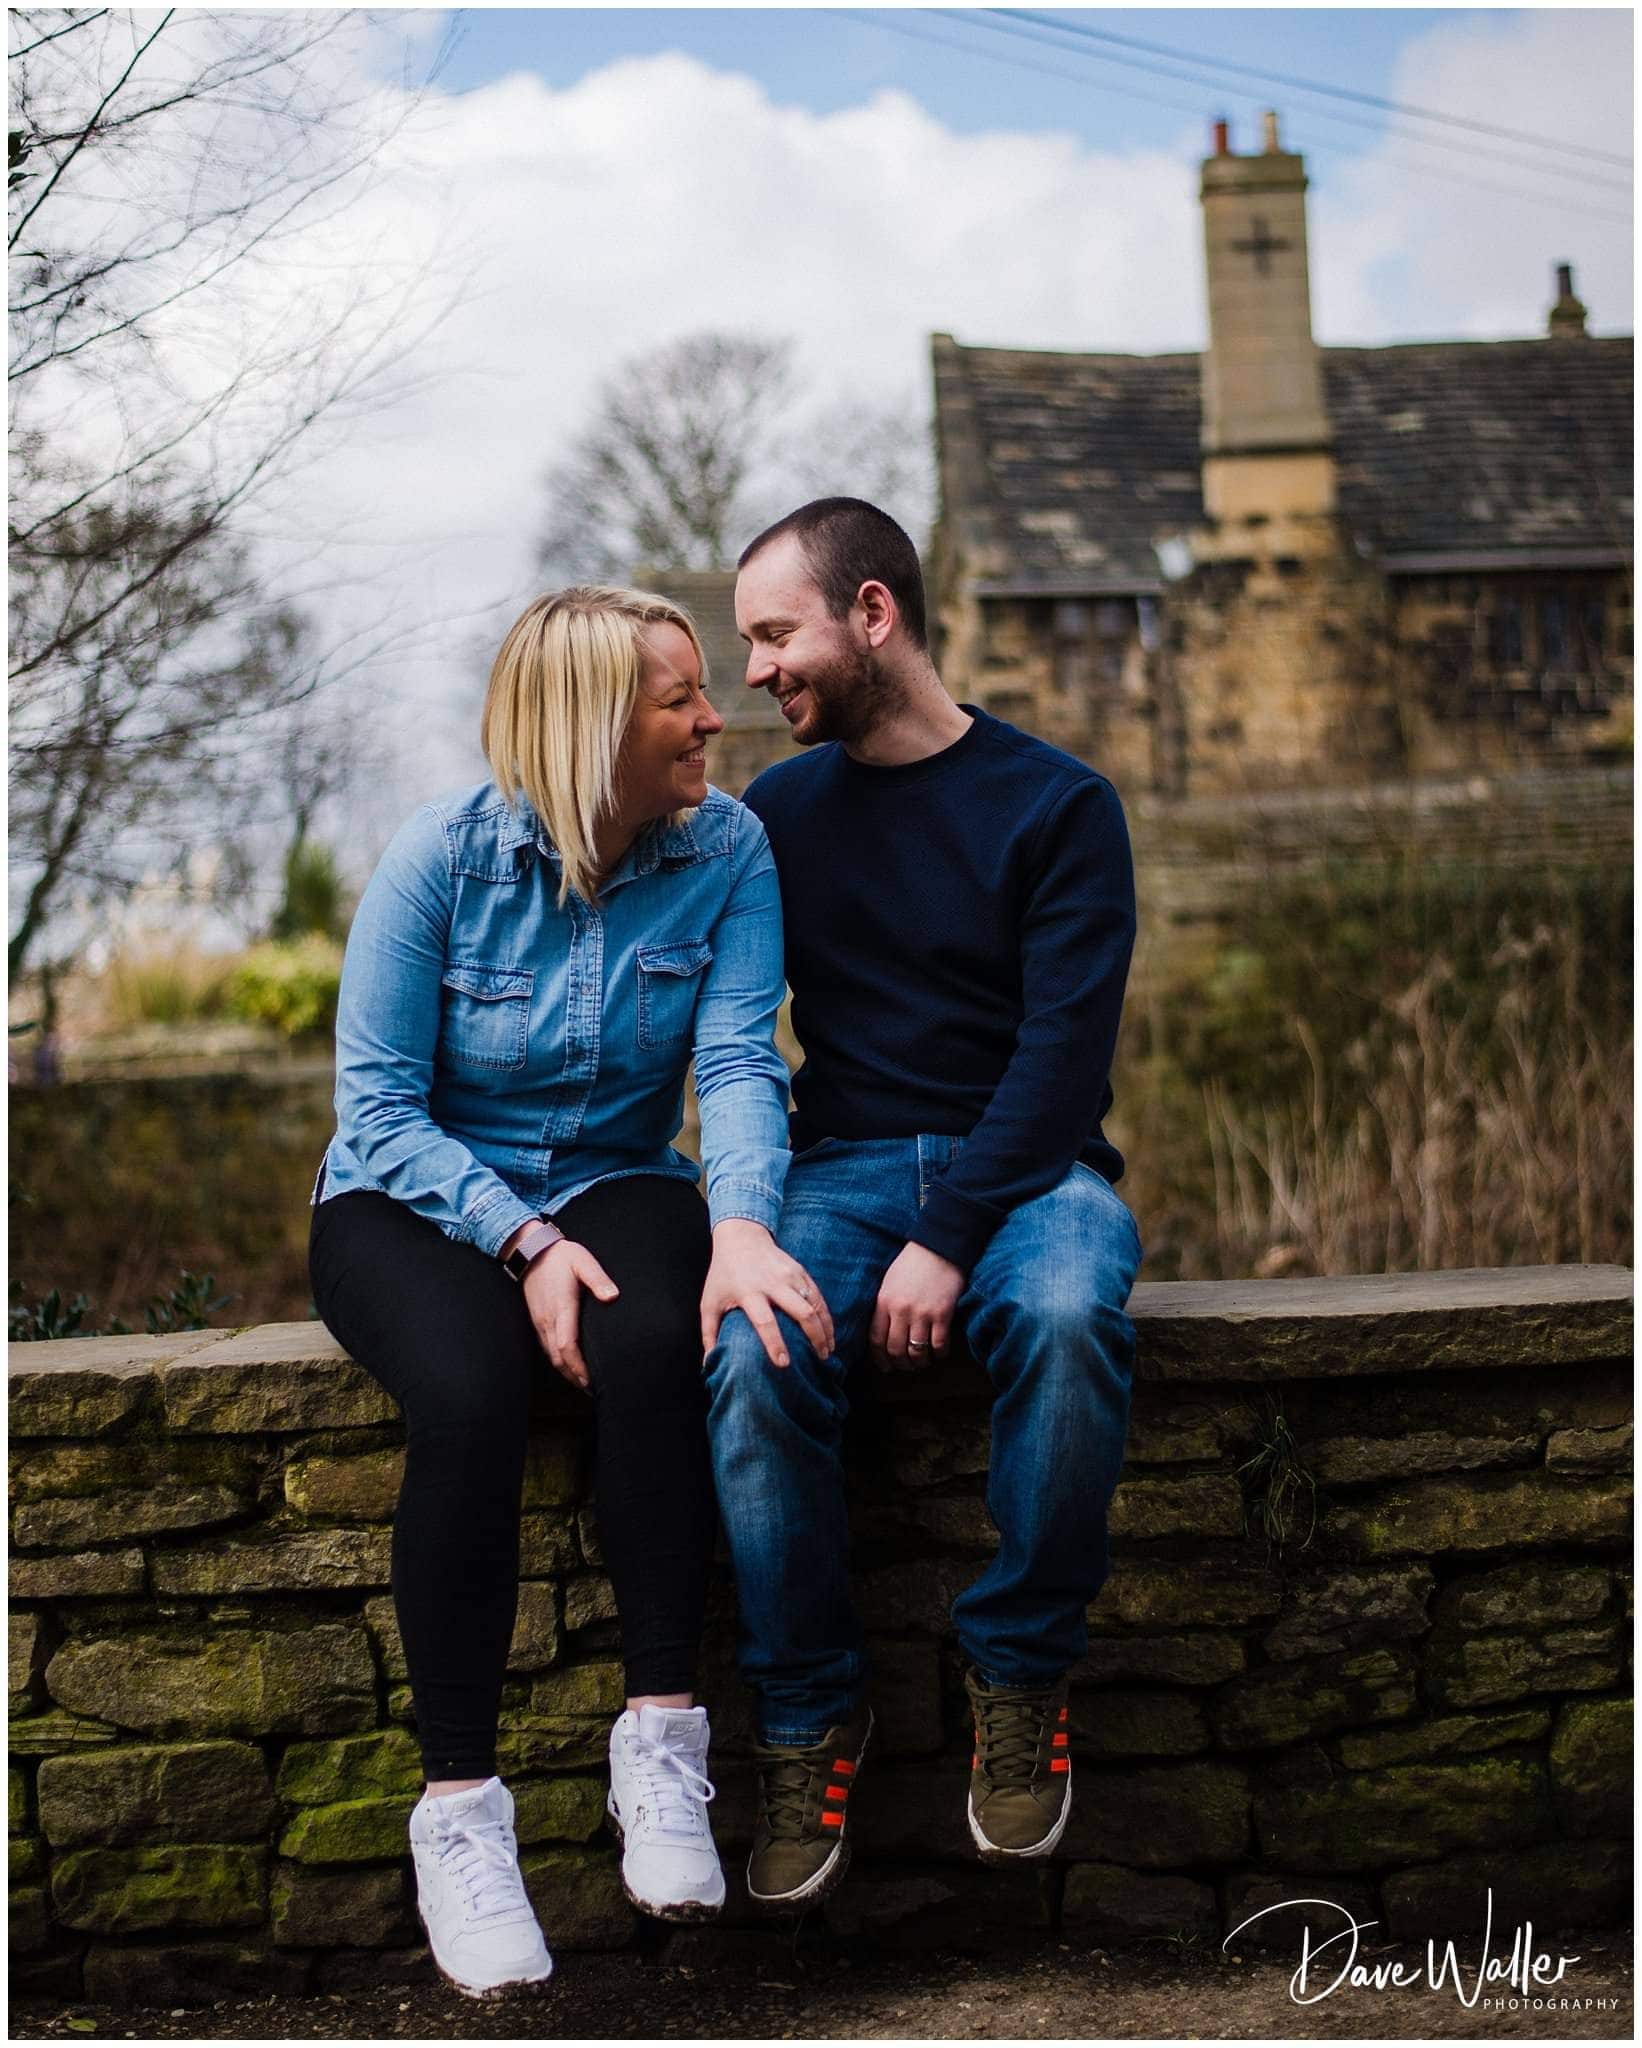 A couple sitting closely on a stone wall, smiling and looking at each other with a blurred historical building in the background during their Rachel & Danny Engagement shoot.